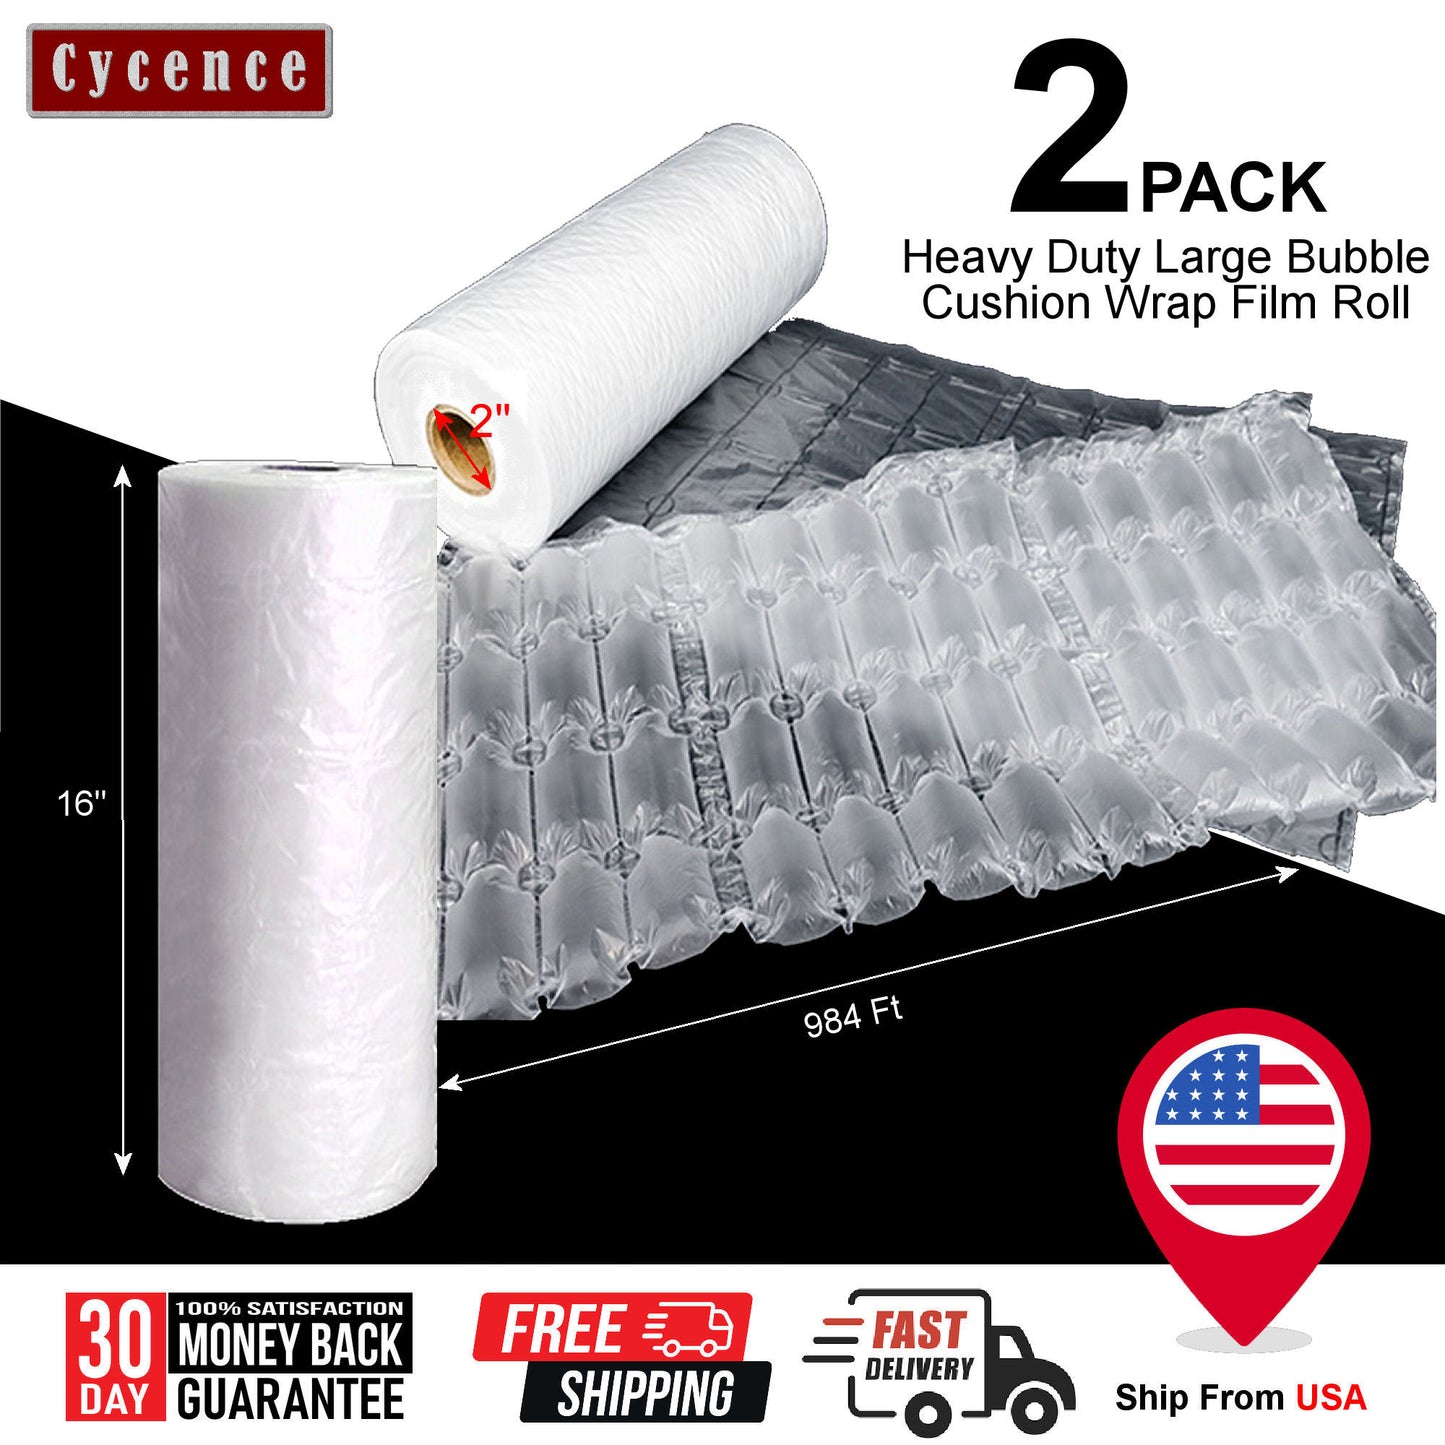 Cycence Air Packaging System Bundle- Automatic Air Bubble Wrap Inflator + 2 Rolls of Heavy Duty Large Bubble Air Cushioning Wrap Film Roll